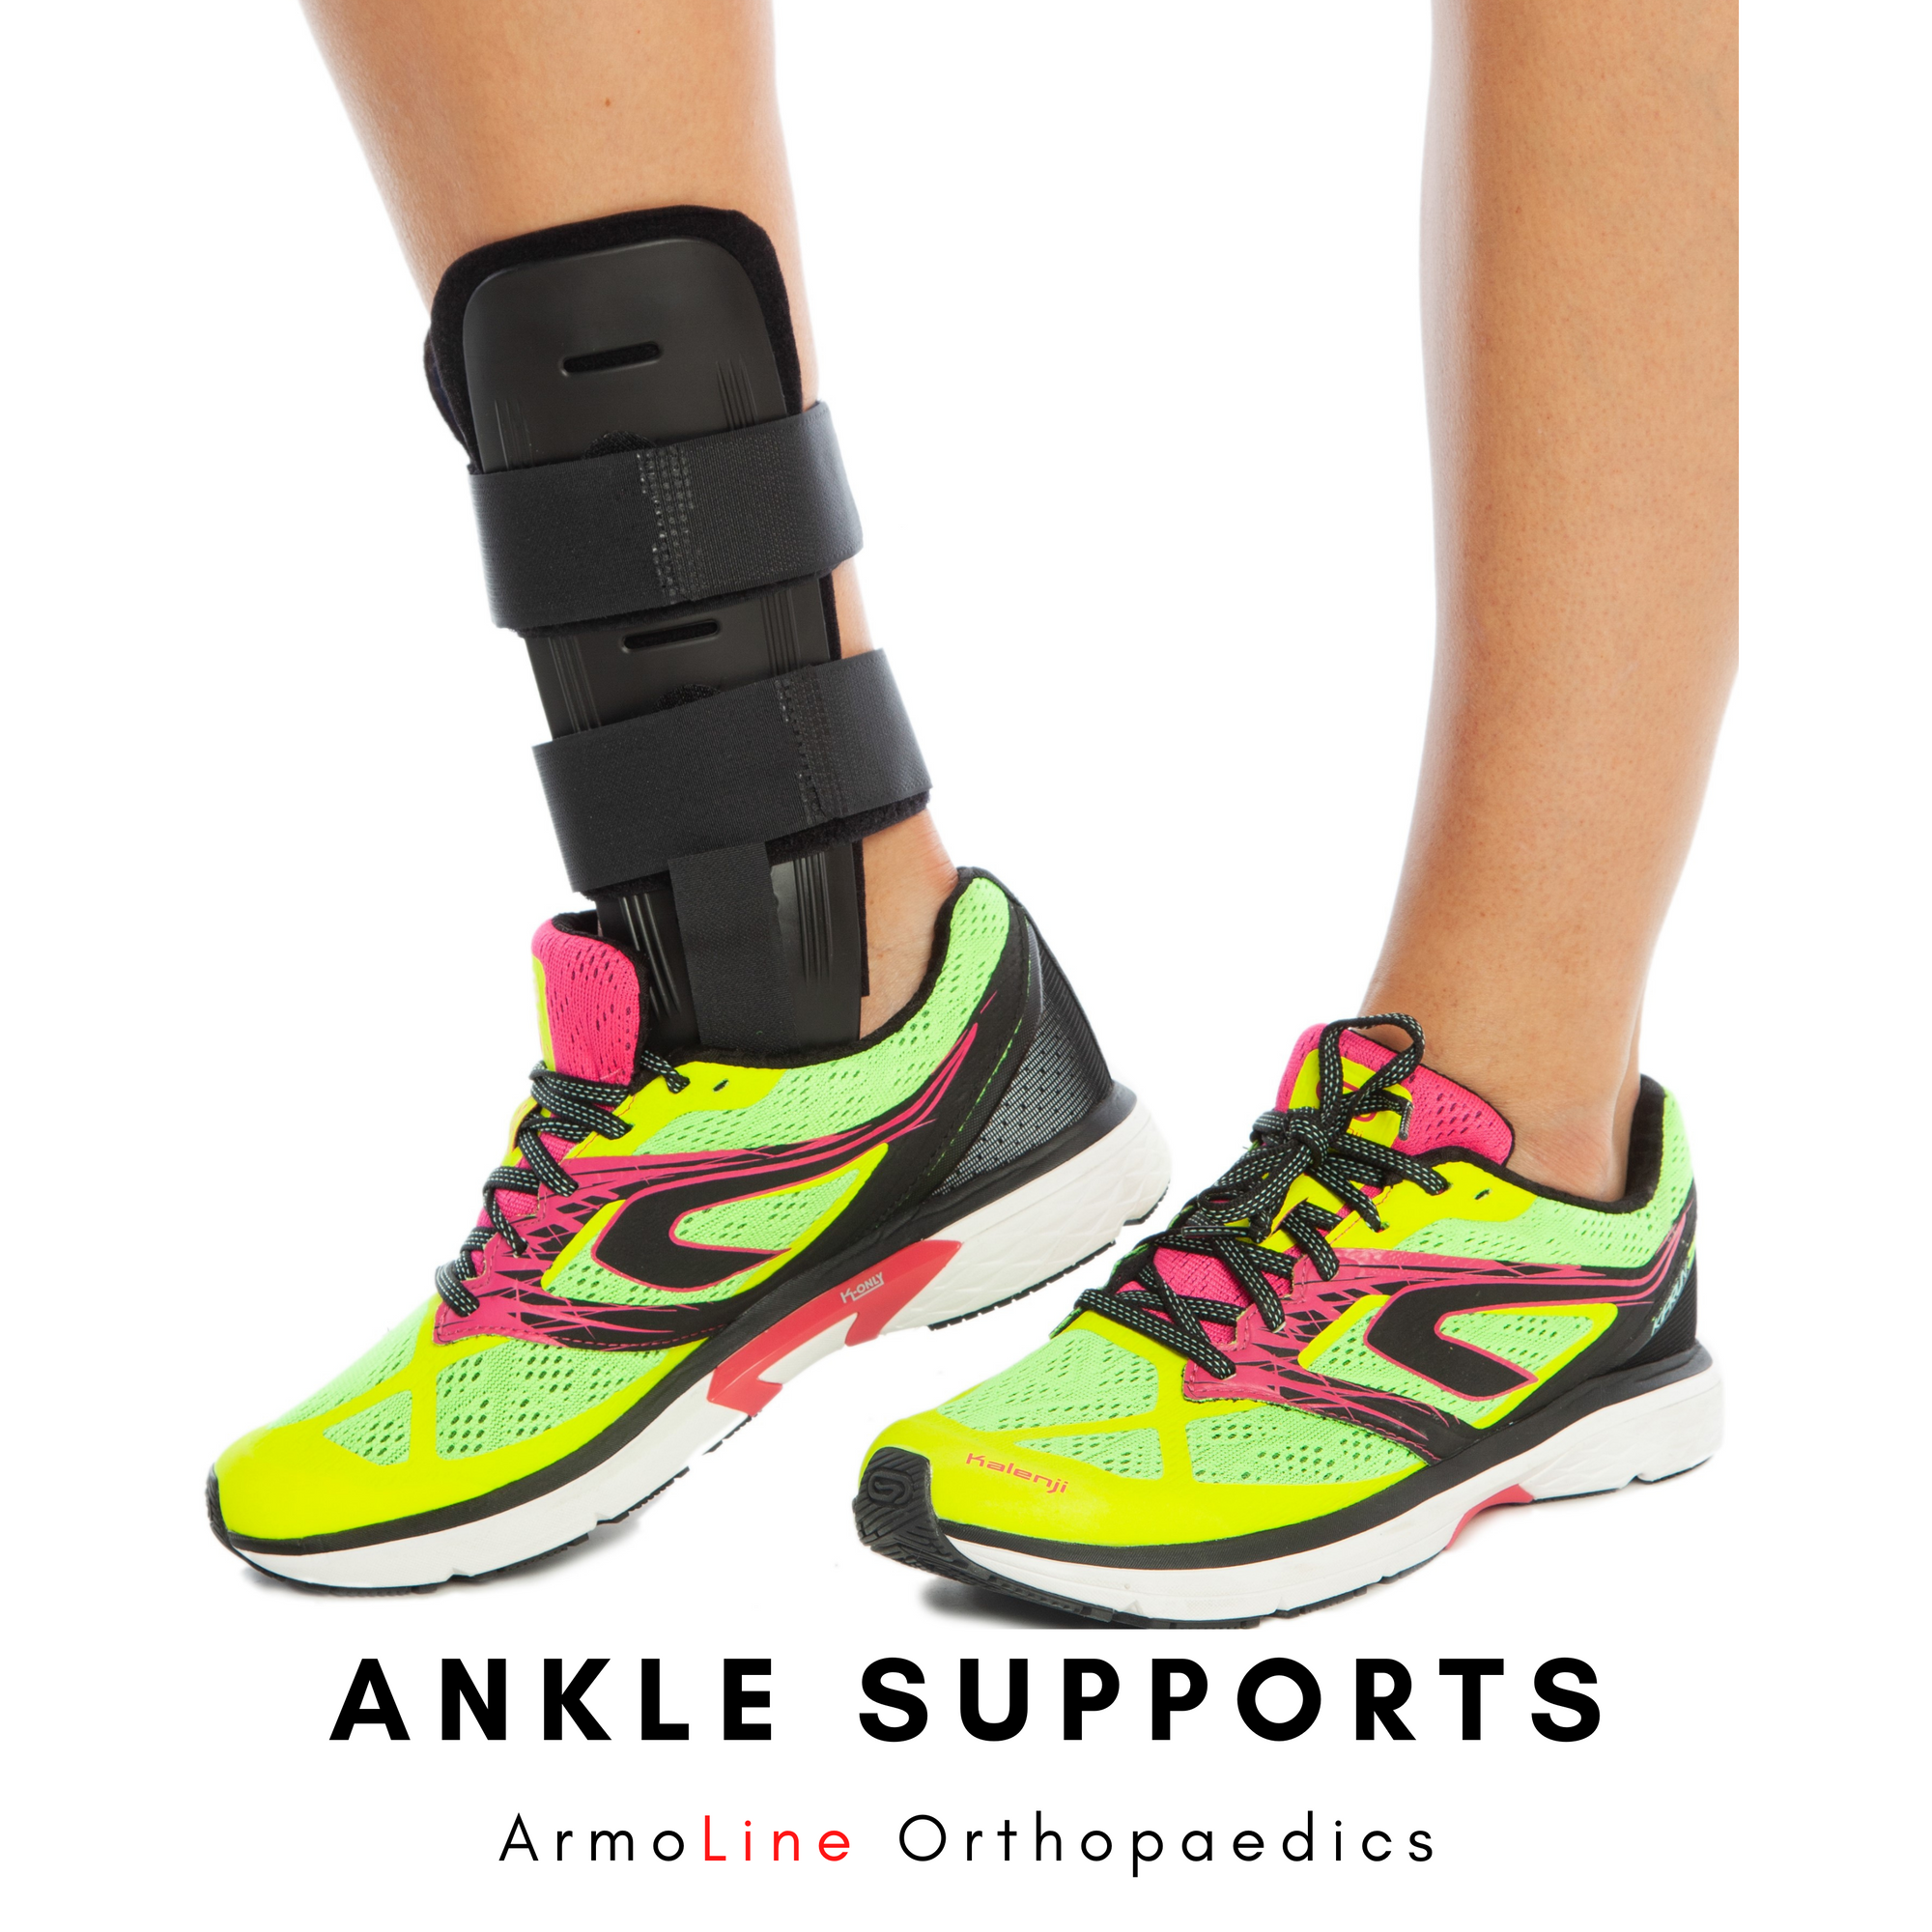 ArmoLine Ankle Supports Collection Page Link Photo. ArmoLine Ankle Support is worn by the model.